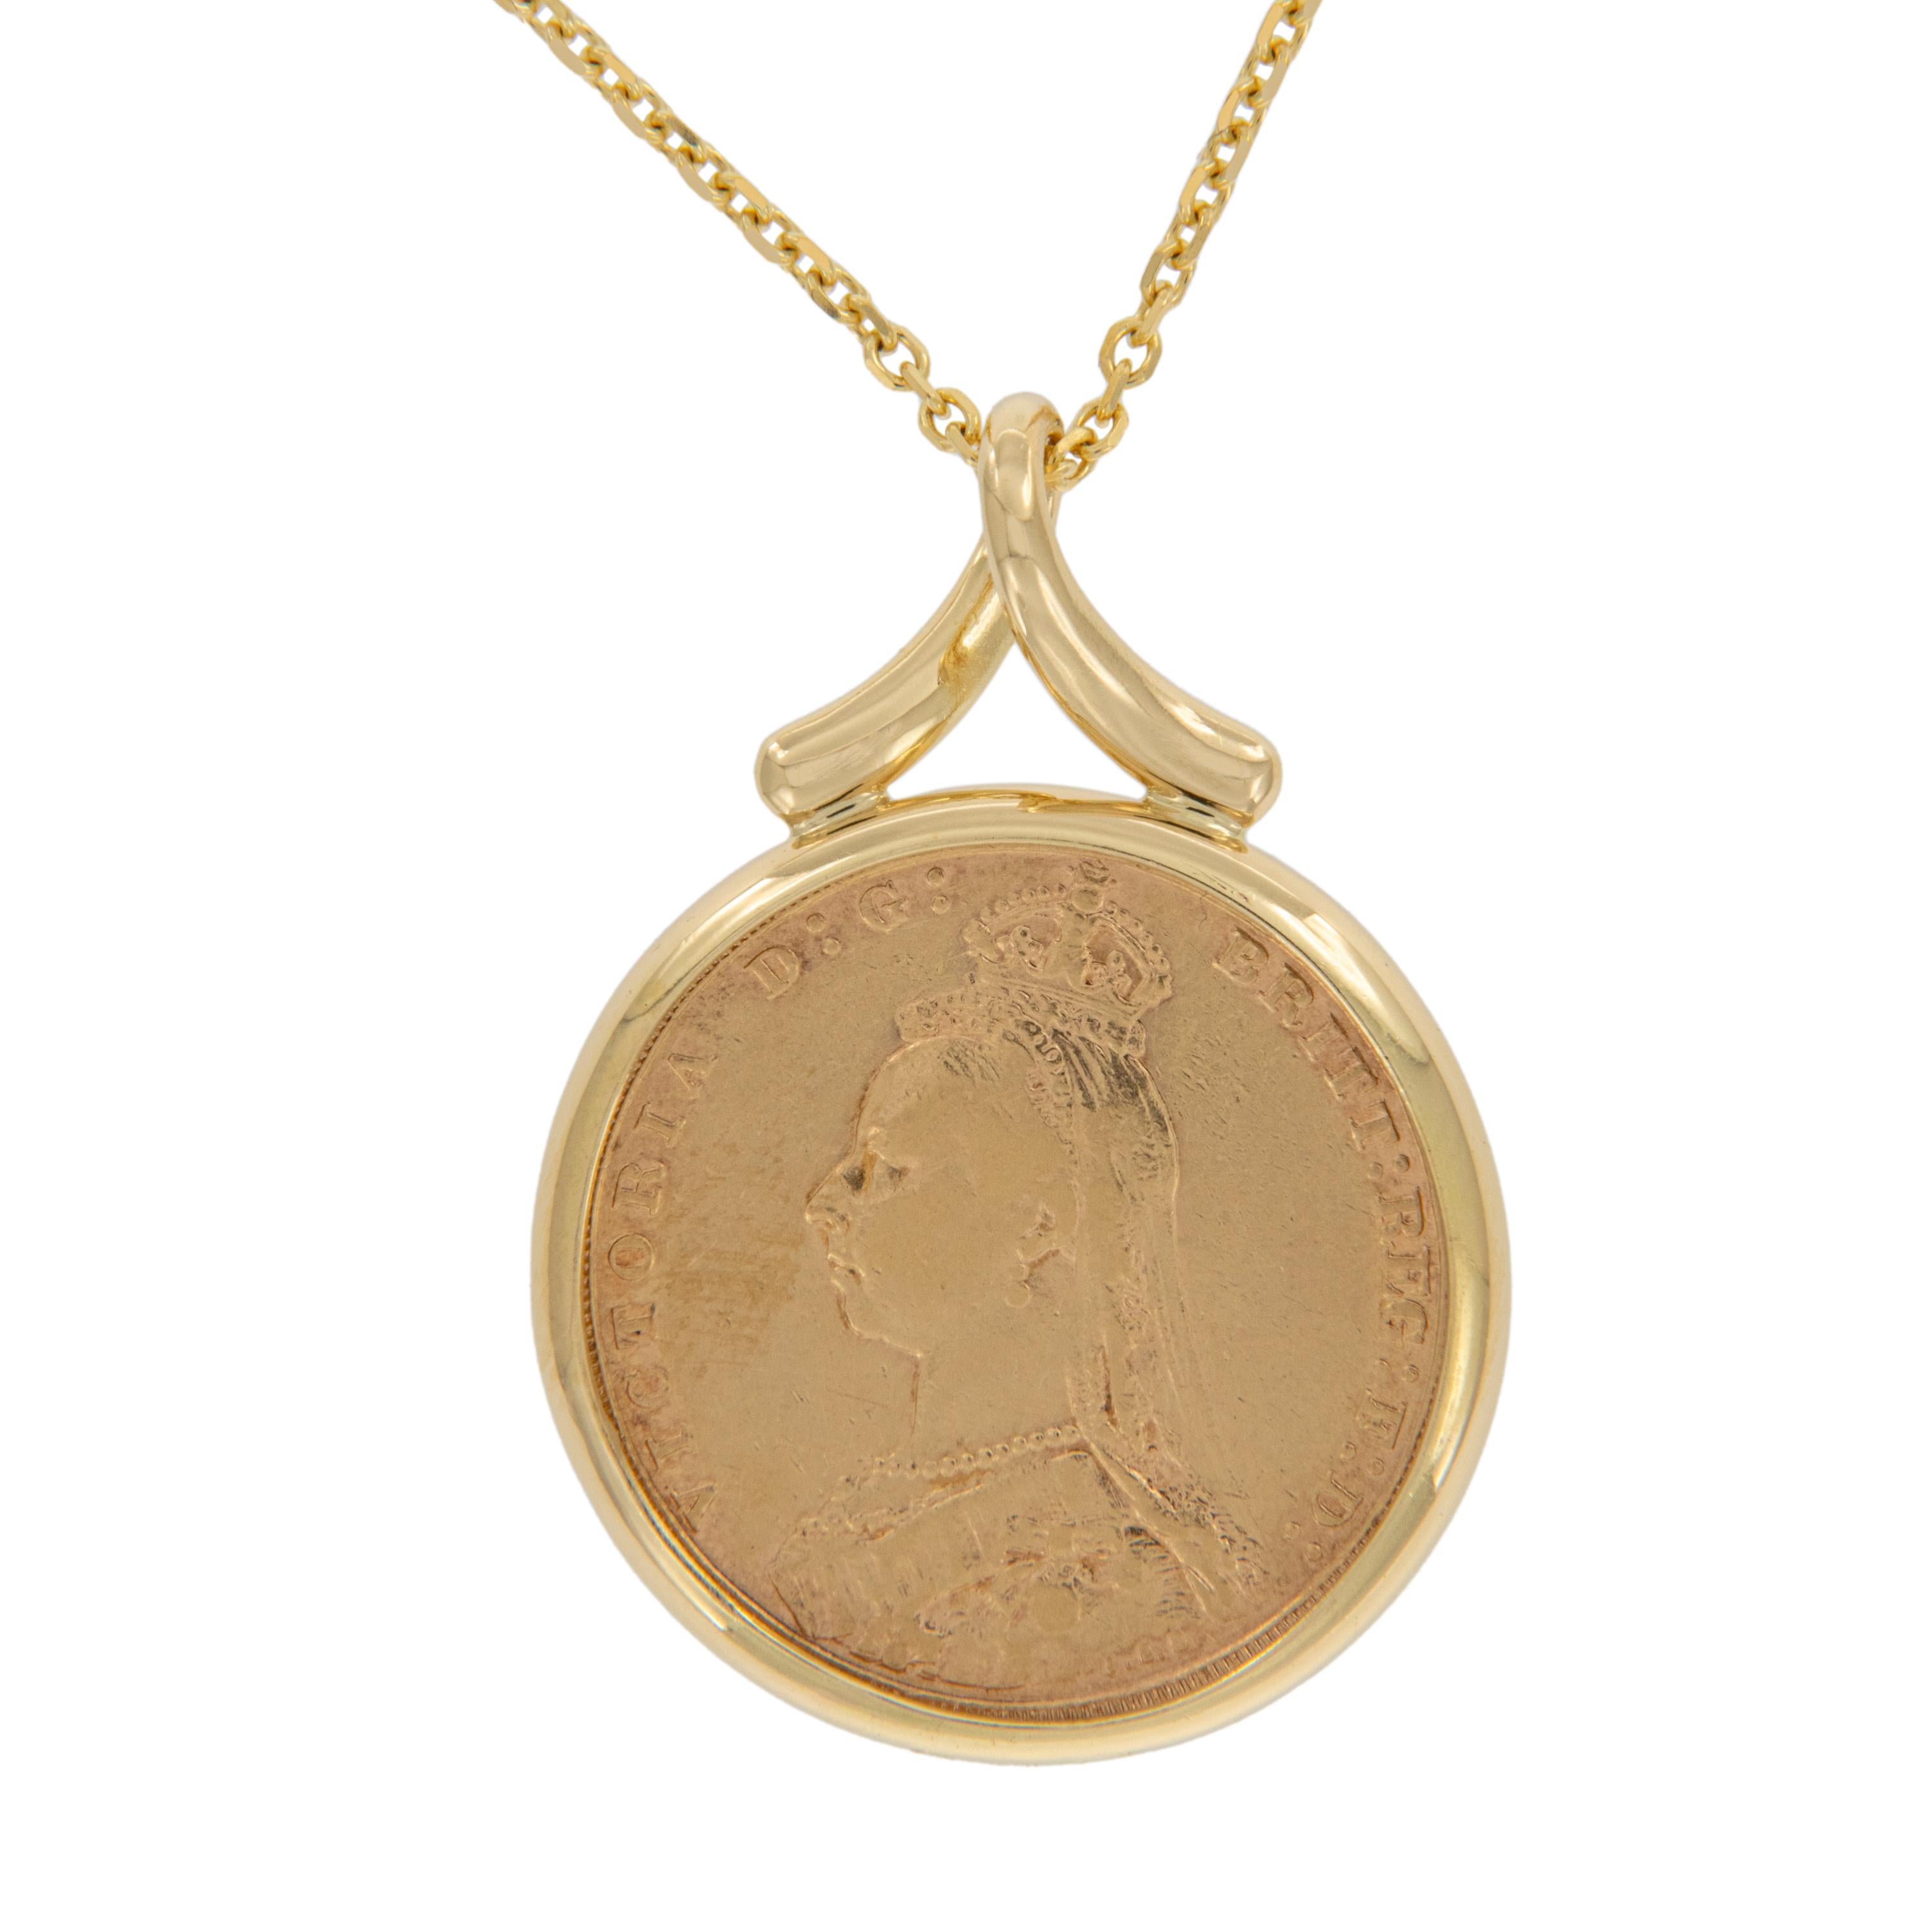 Enjoy a piece of British gold coin history! This 1893 Gold Sovereign Queen Victoria veiled head coin is framed in 18k yellow gold and suspends from a ribbon-style bail on an 18 karat yellow gold 16-inch chain. Pendant measures 42mm tall x 32mm wide.